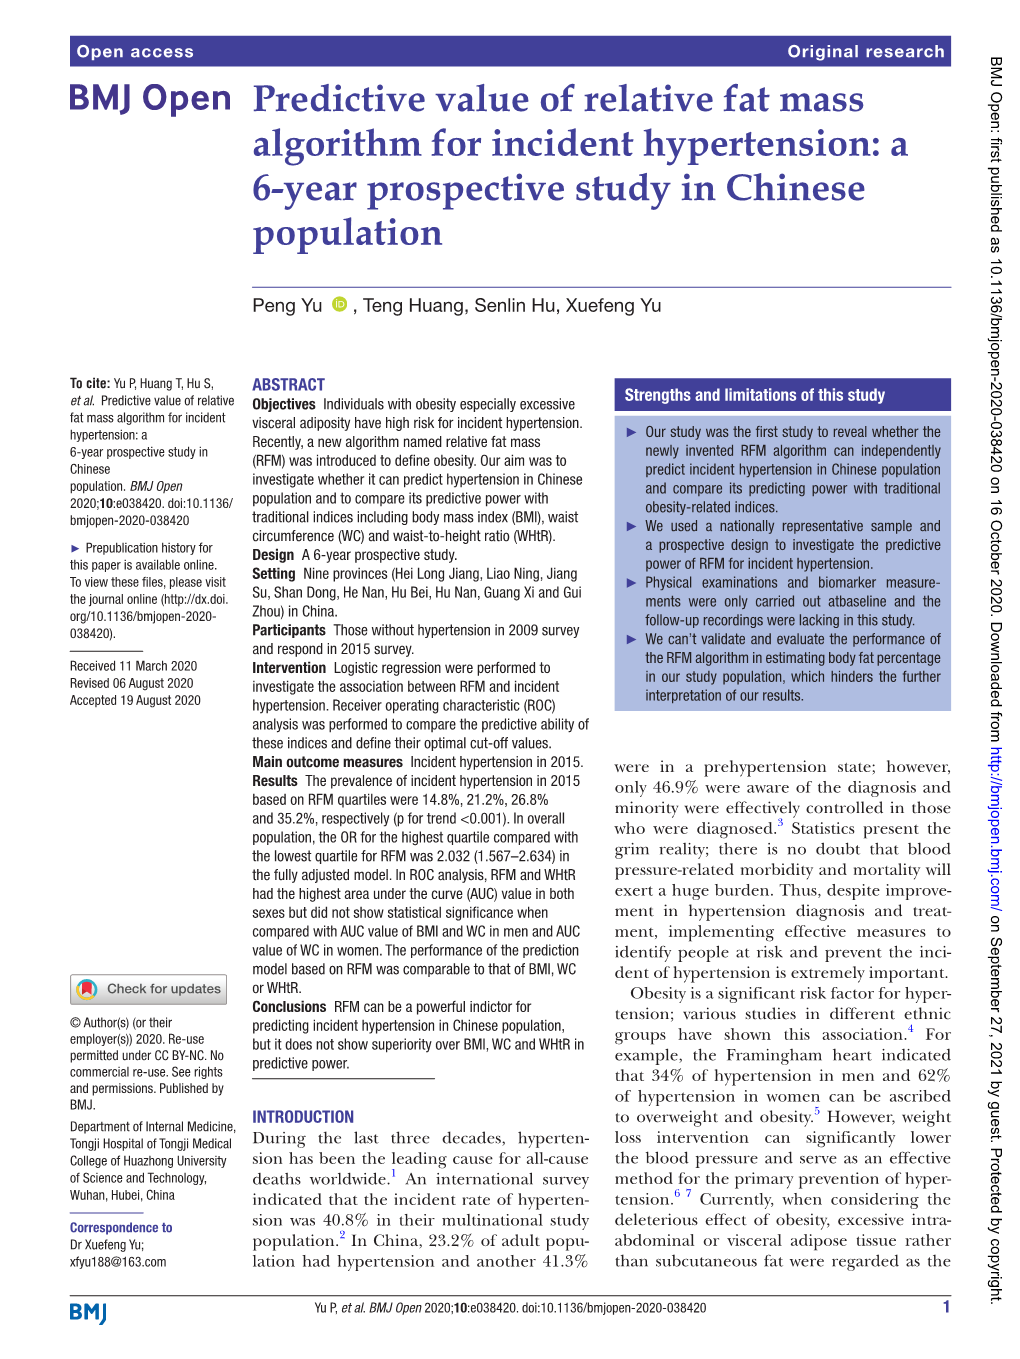 Predictive Value of Relative Fat Mass Algorithm for Incident Hypertension: a 6-­Year Prospective Study in Chinese Population